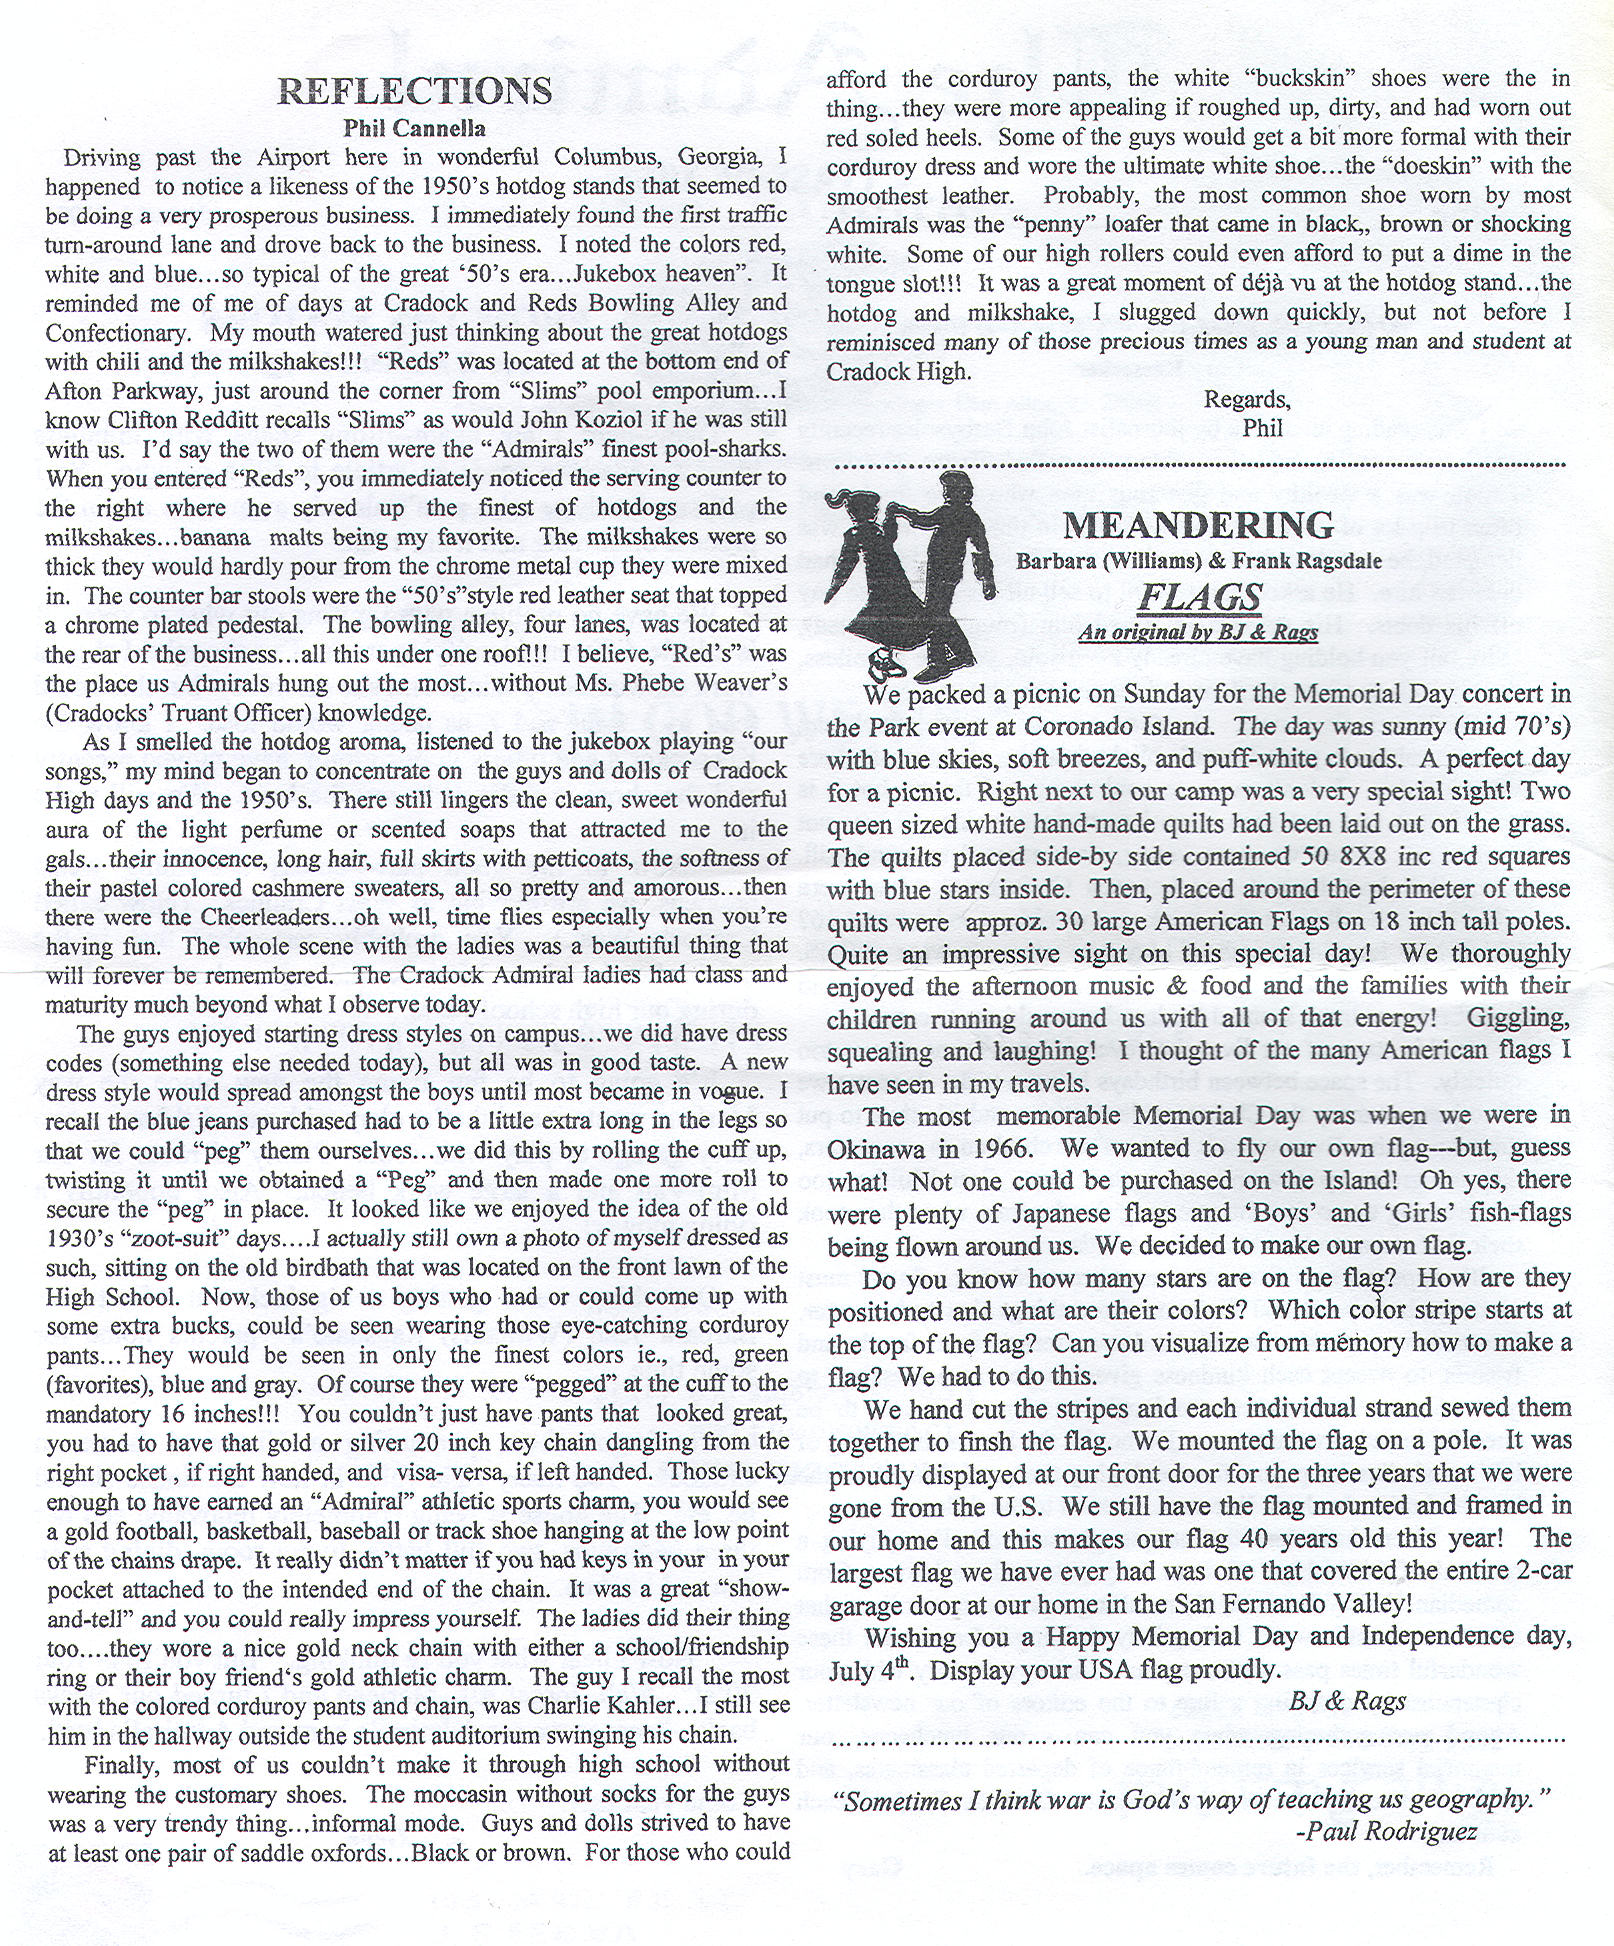 The Admiral - August 2006 - pg. 2